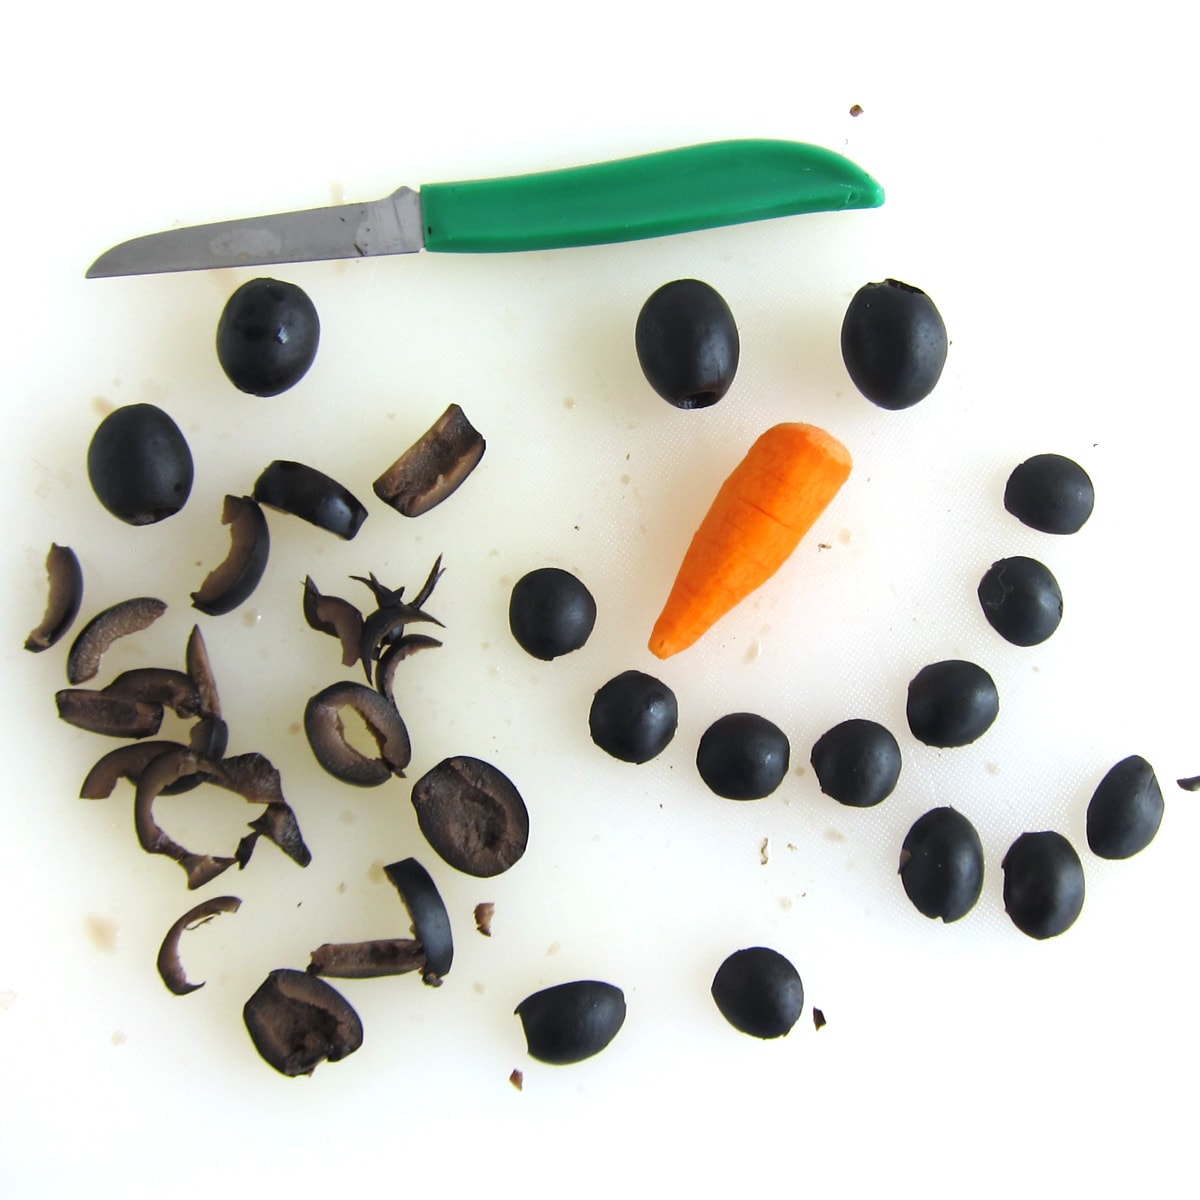 Cut black olive eyes and smile and a carrot nose for the snowman dip.